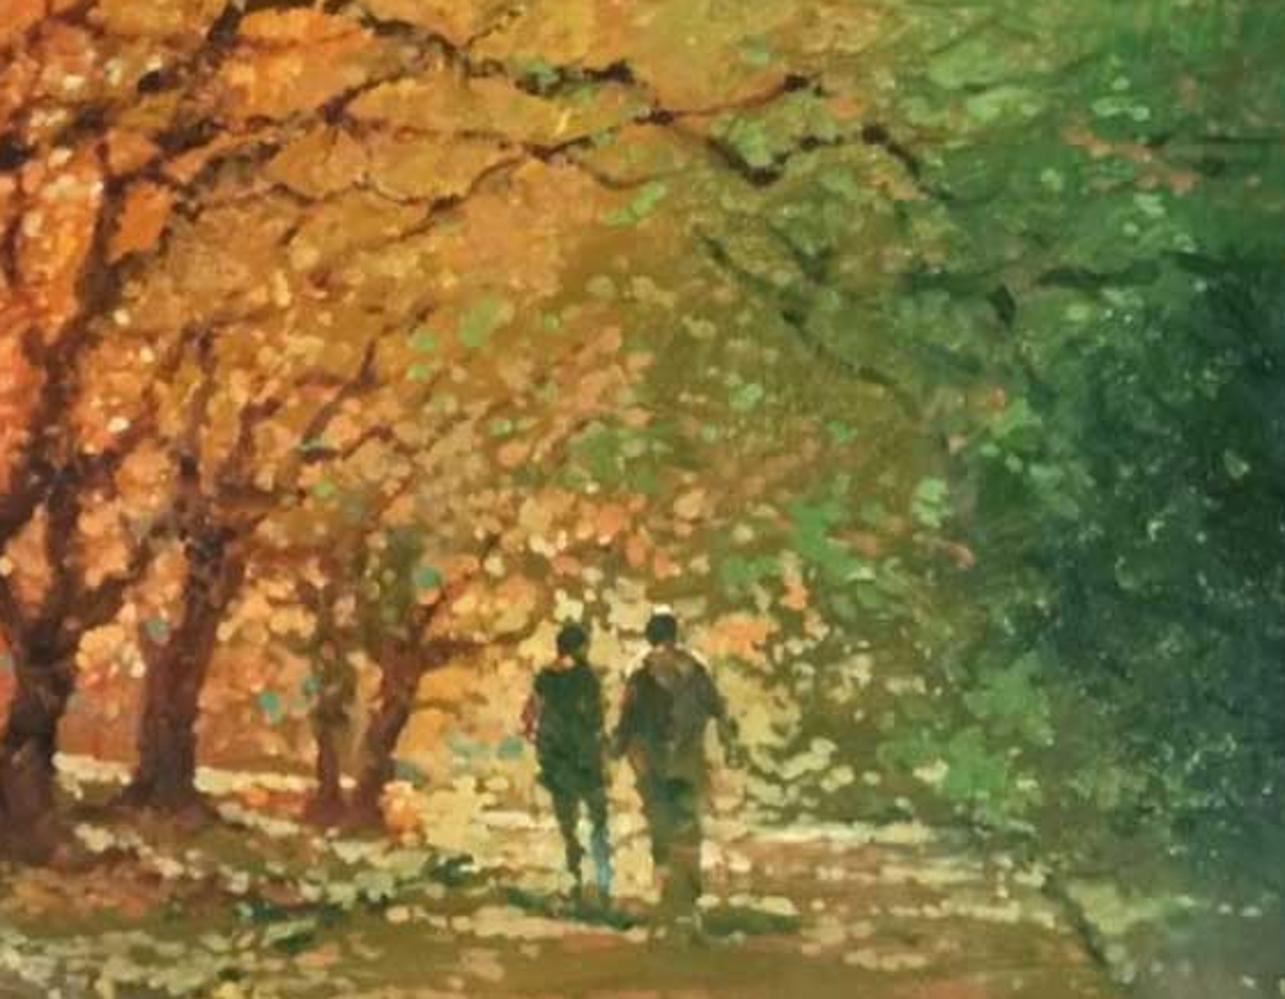 Golden Afternoon - Autumn Walks / Fall in Central Park: Oil Paint on Canvas - Painting by David Hinchcliffe